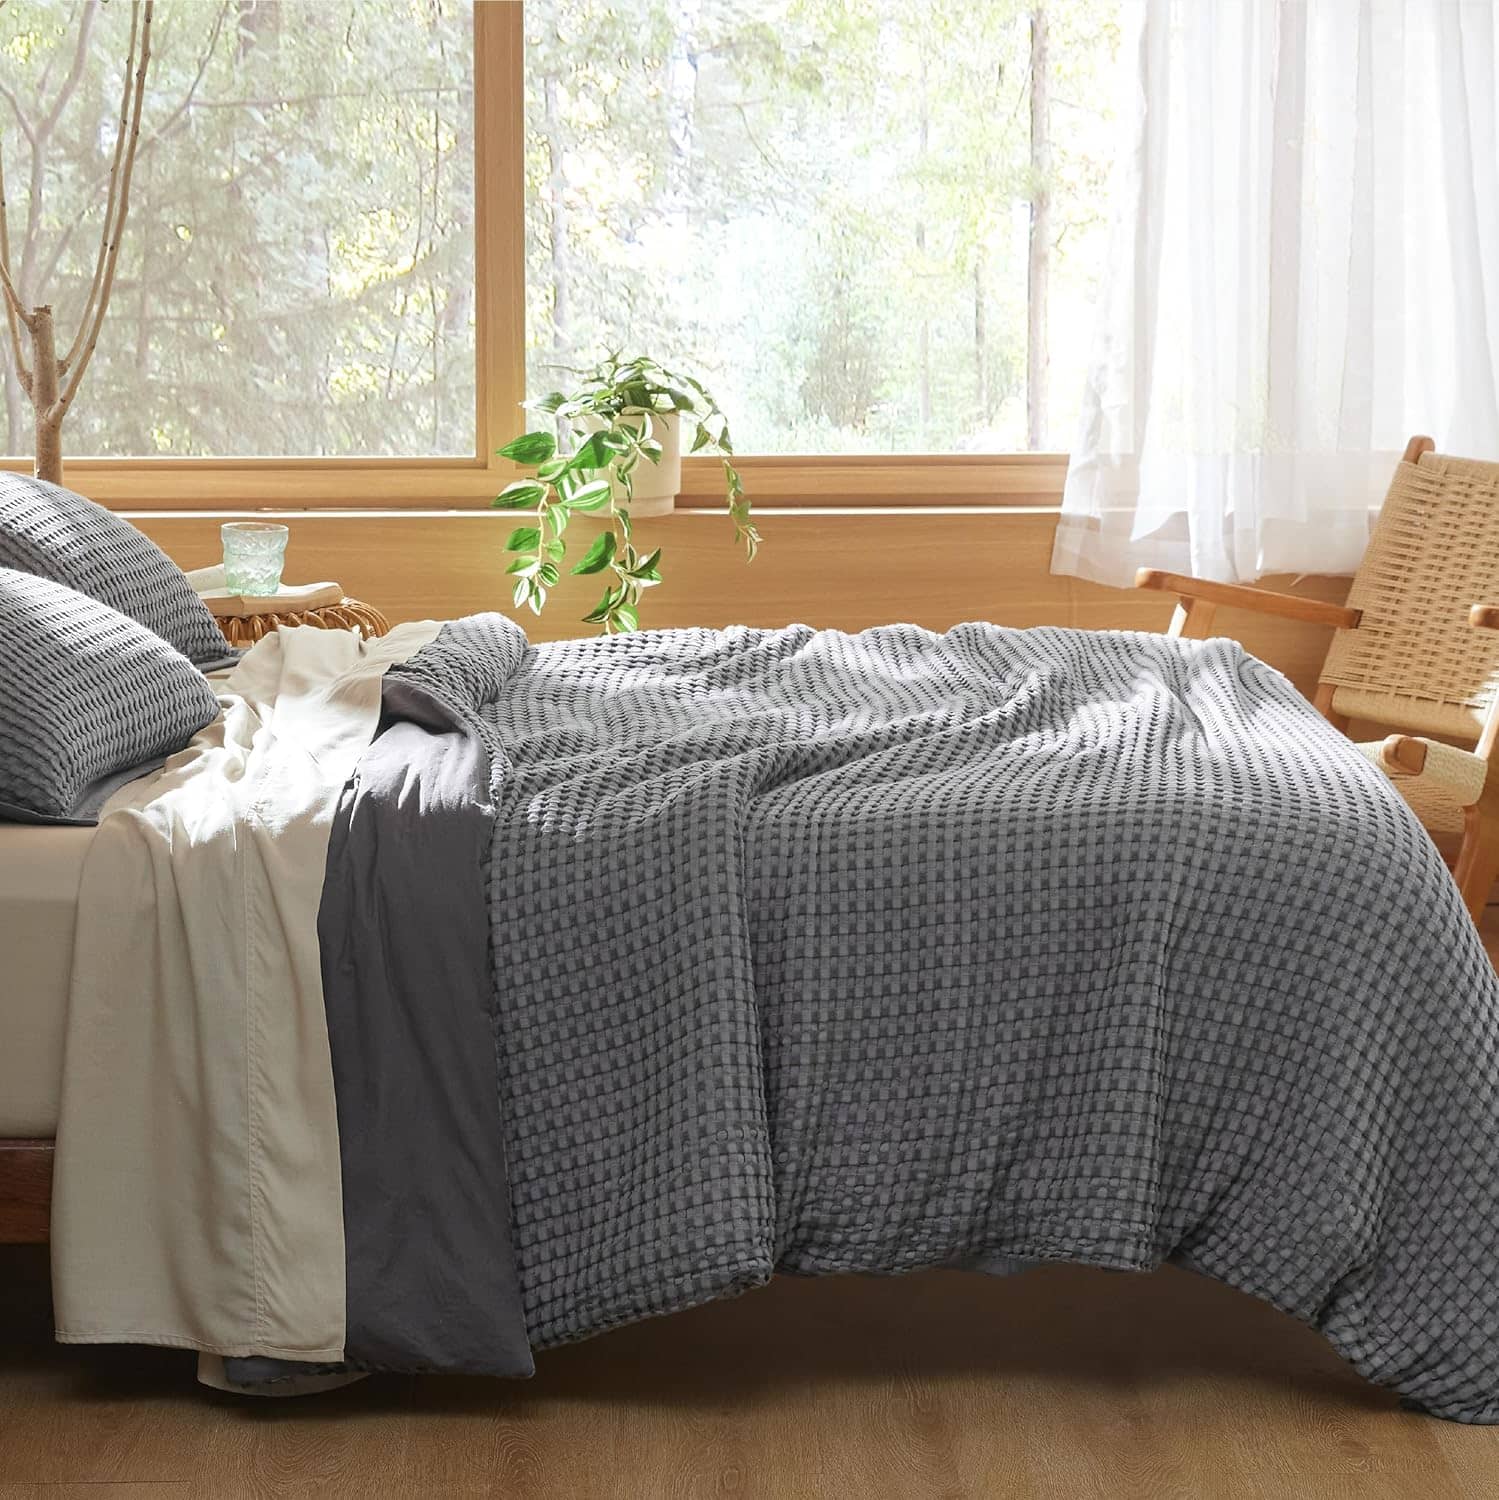 Bedsure Rayon Derived from Bamboo and Cotton Duvet Cover Set